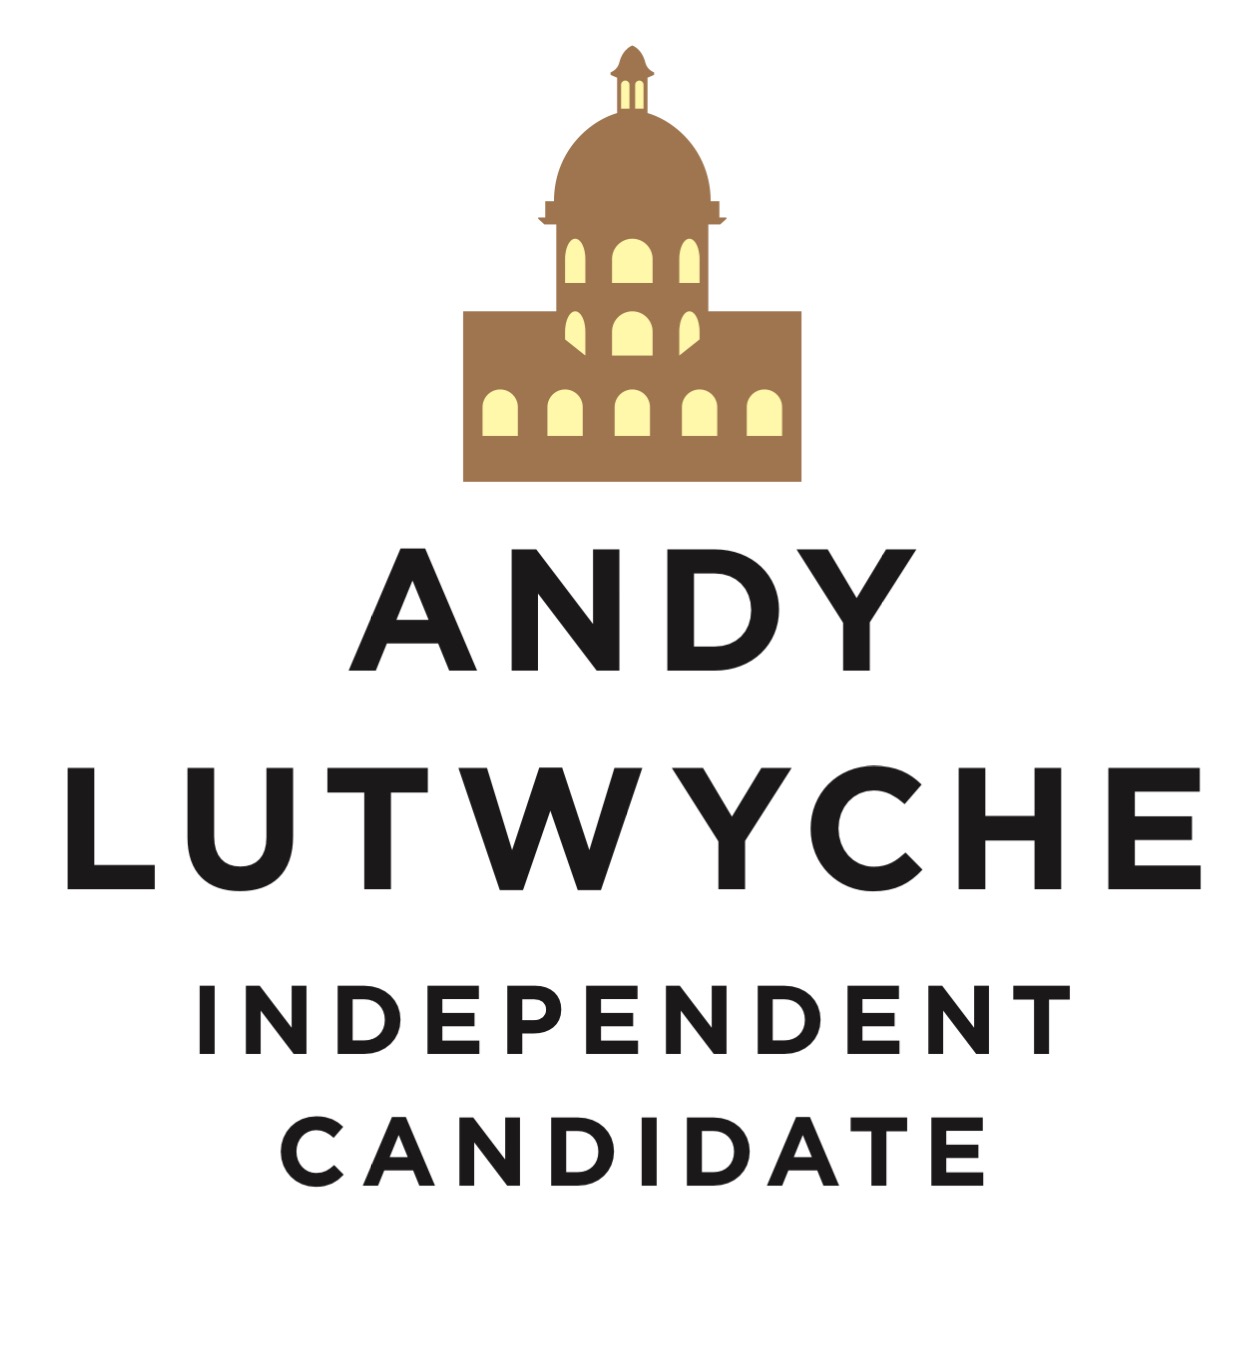 Andy Lutwyche - Independent Candidate